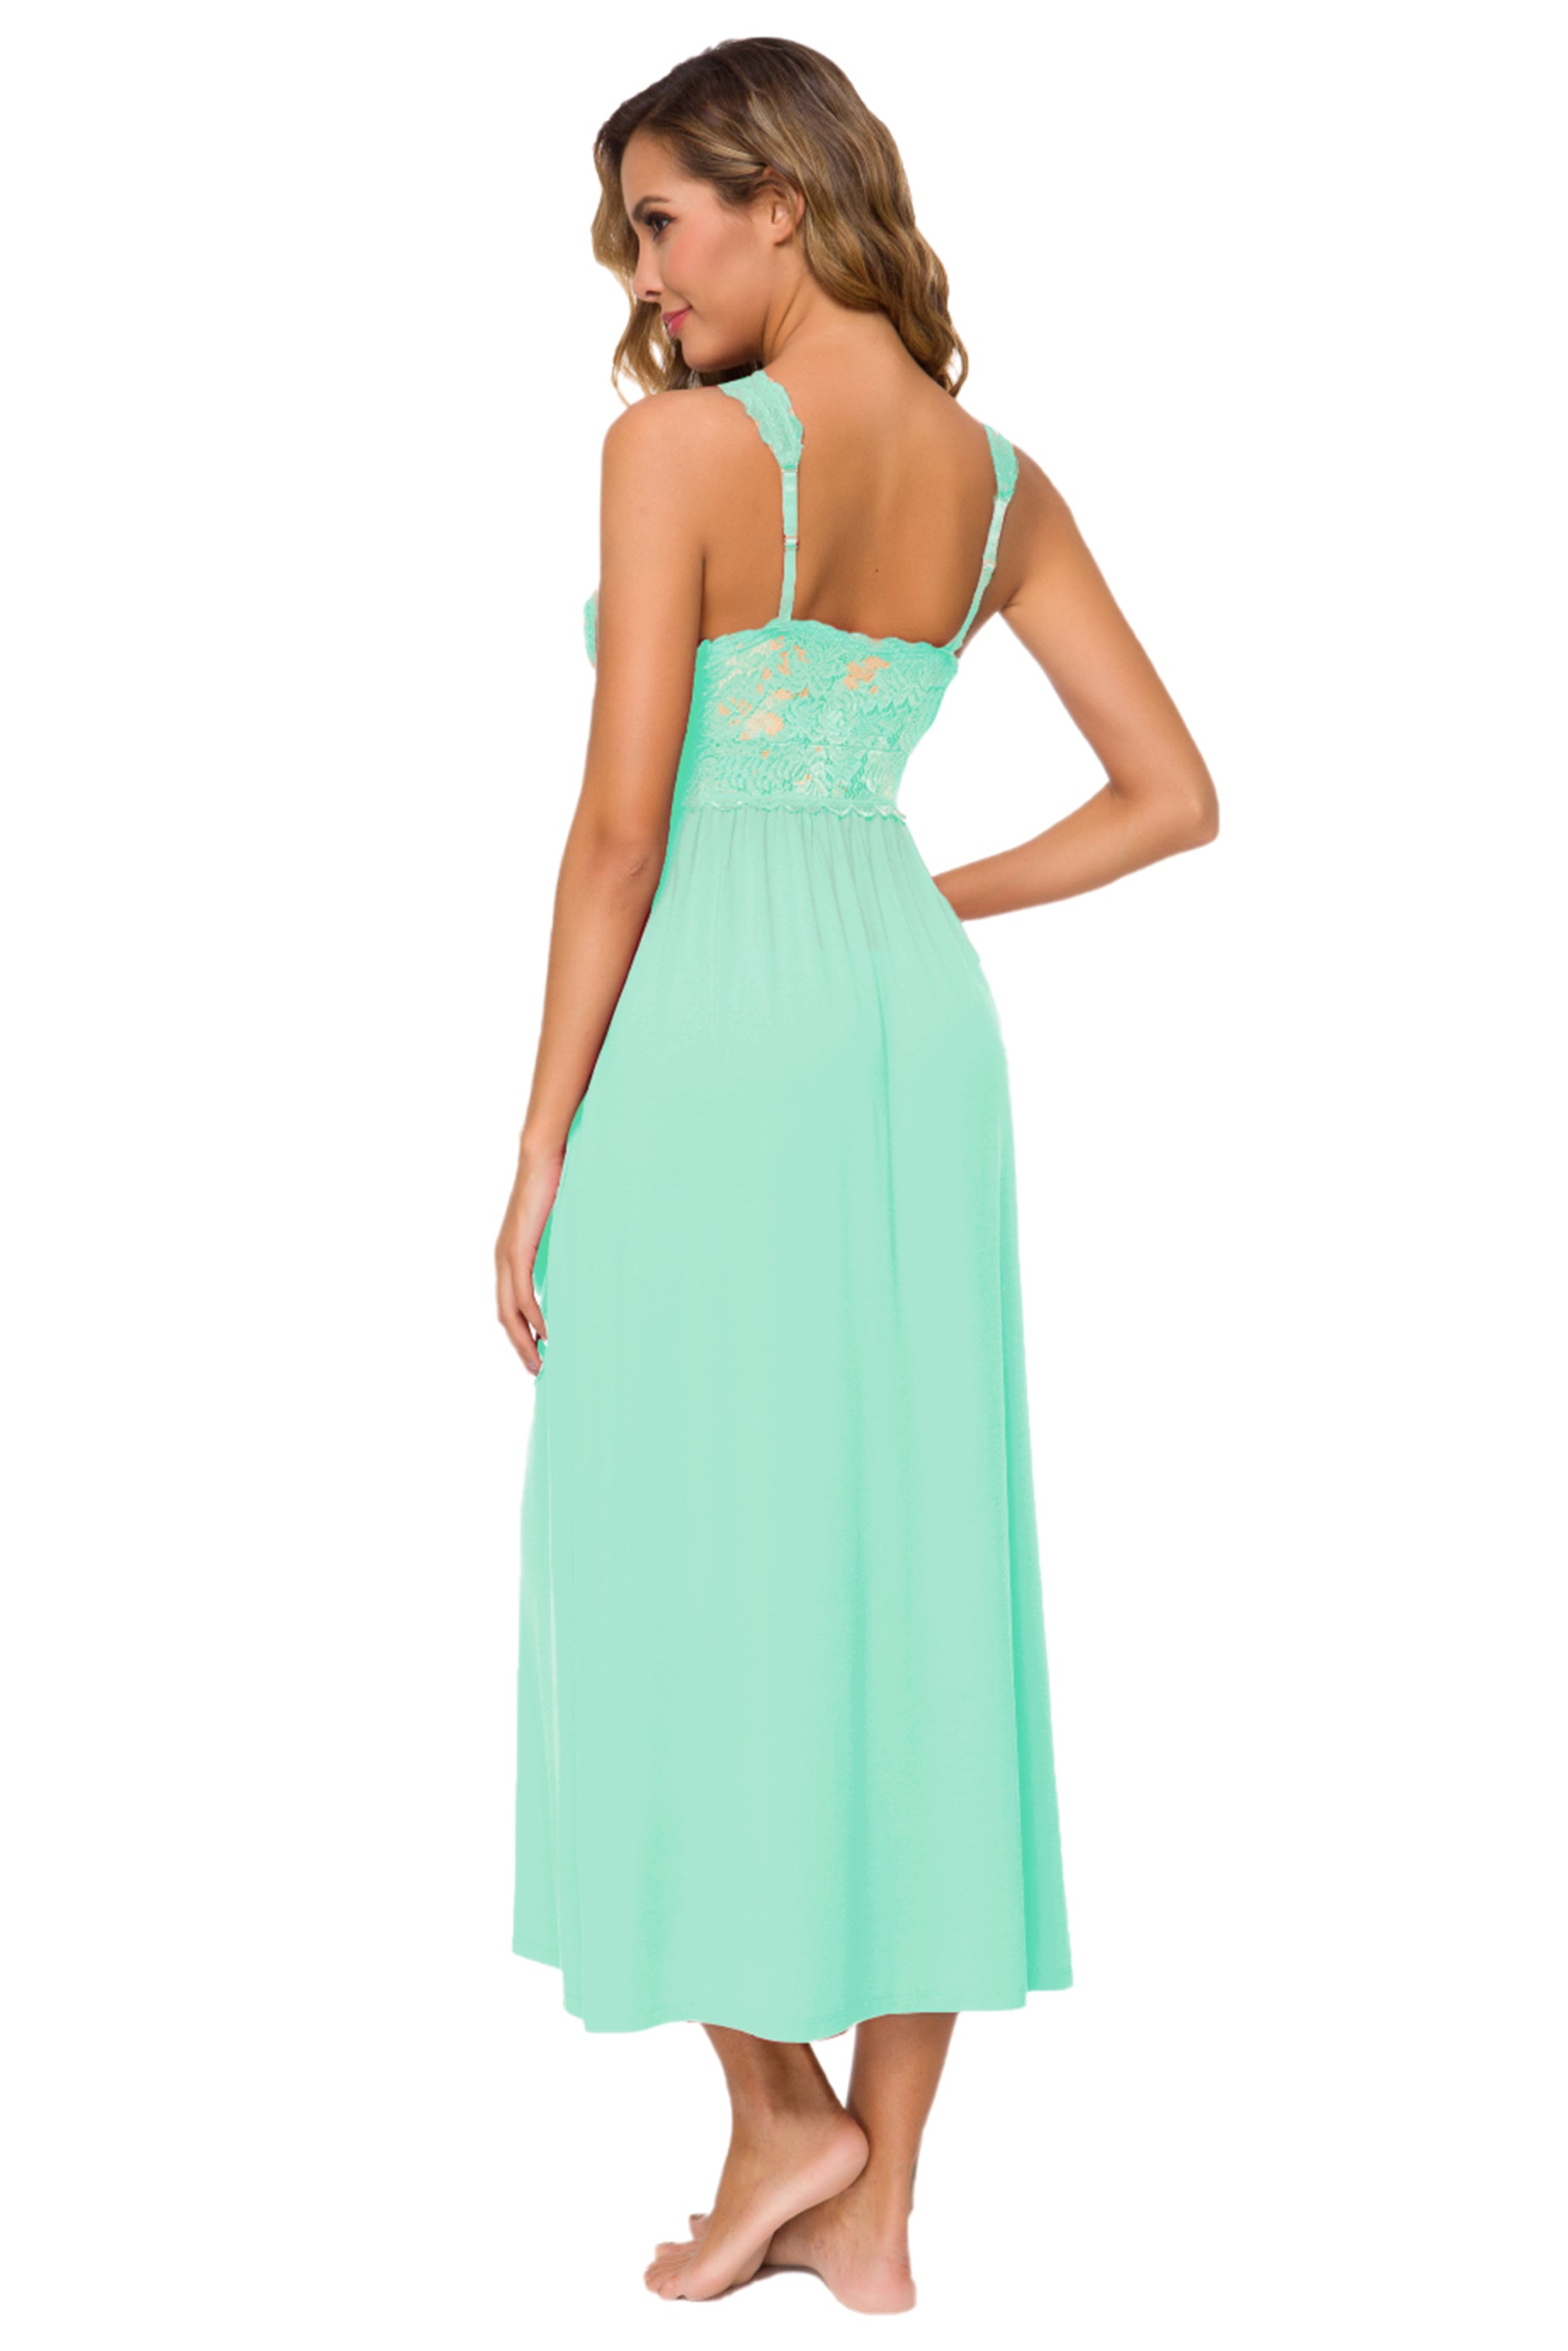 Sexy Lace Jersey Elegant Long Nightgown Chemises Mint